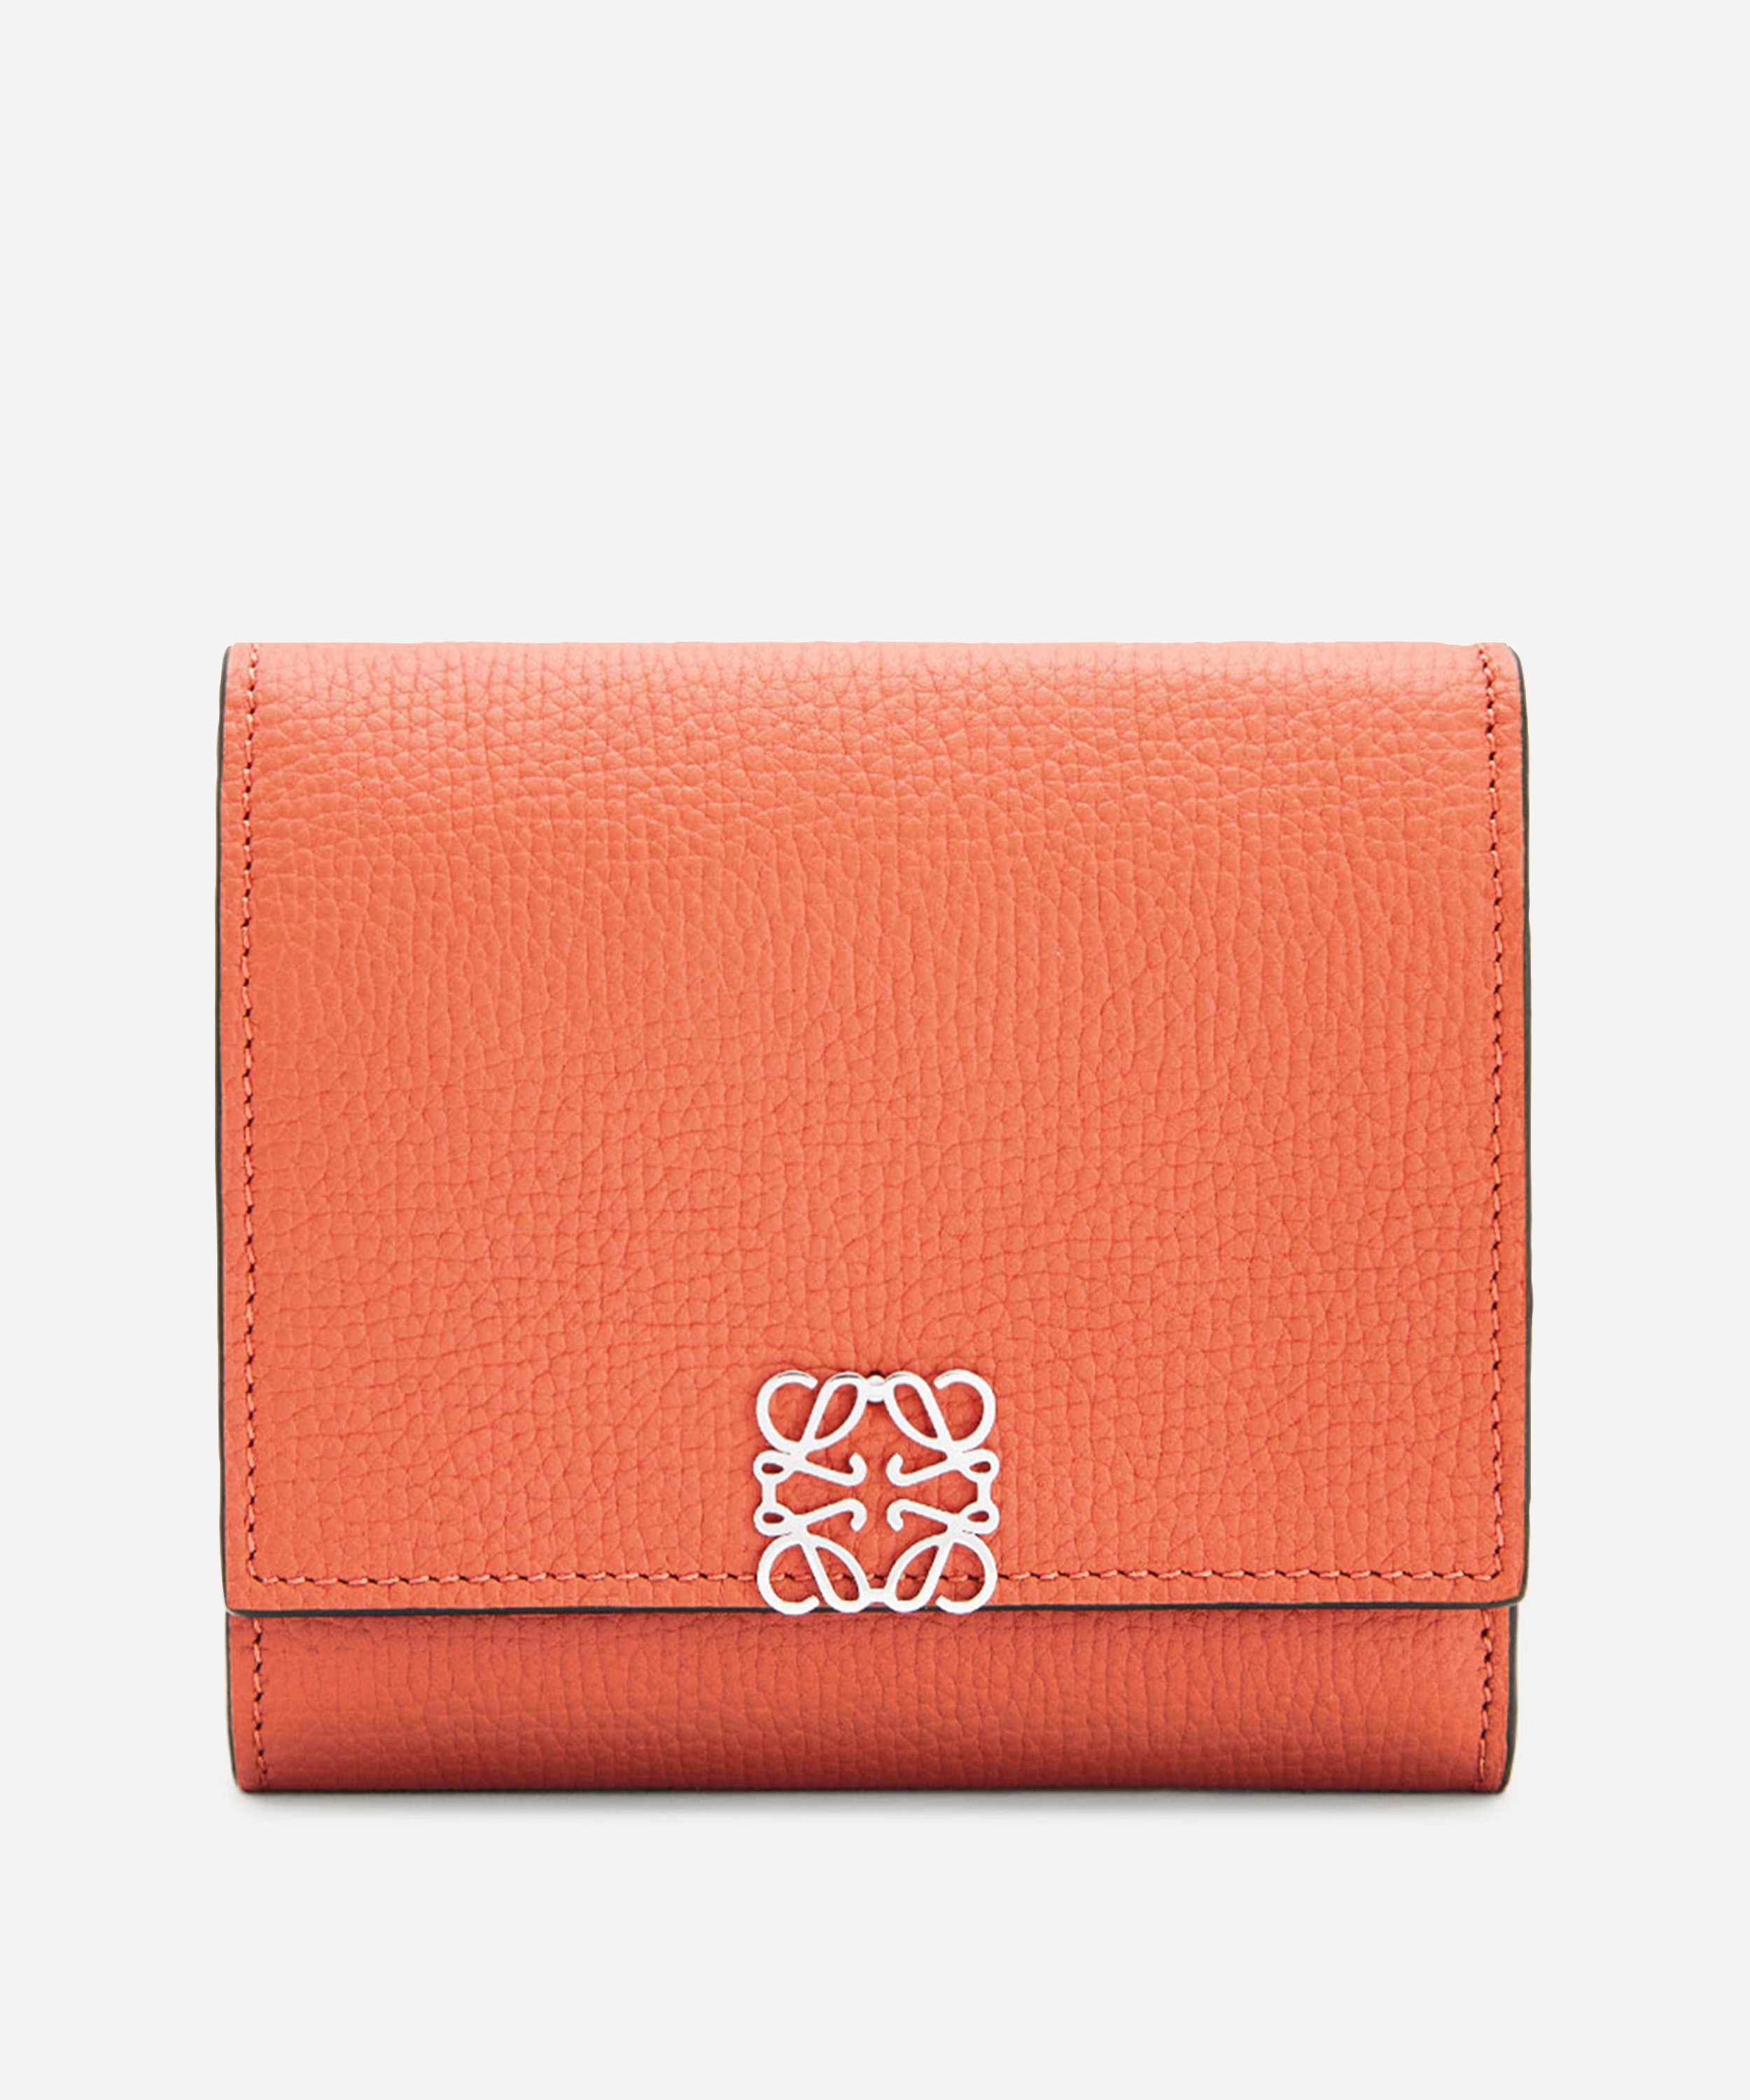 Loewe Anagram Square Leather Wallet | Liberty